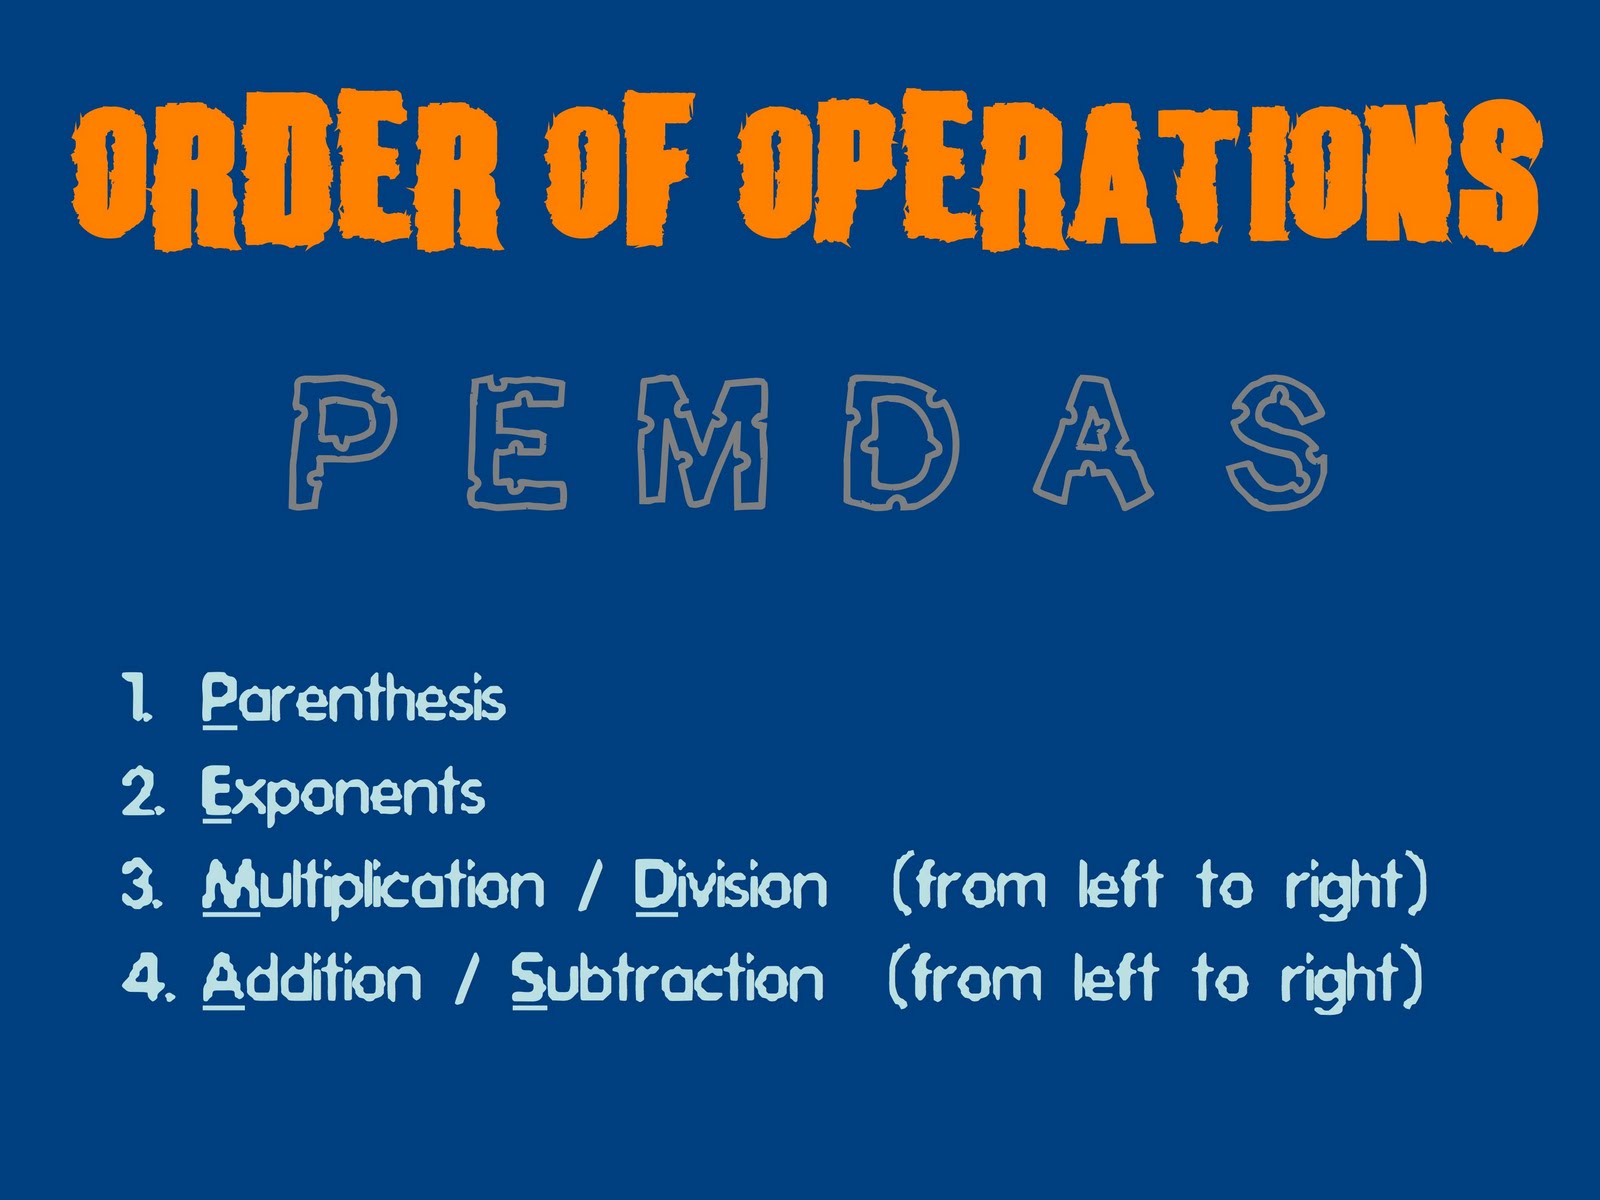 6th grade: Order of Operations